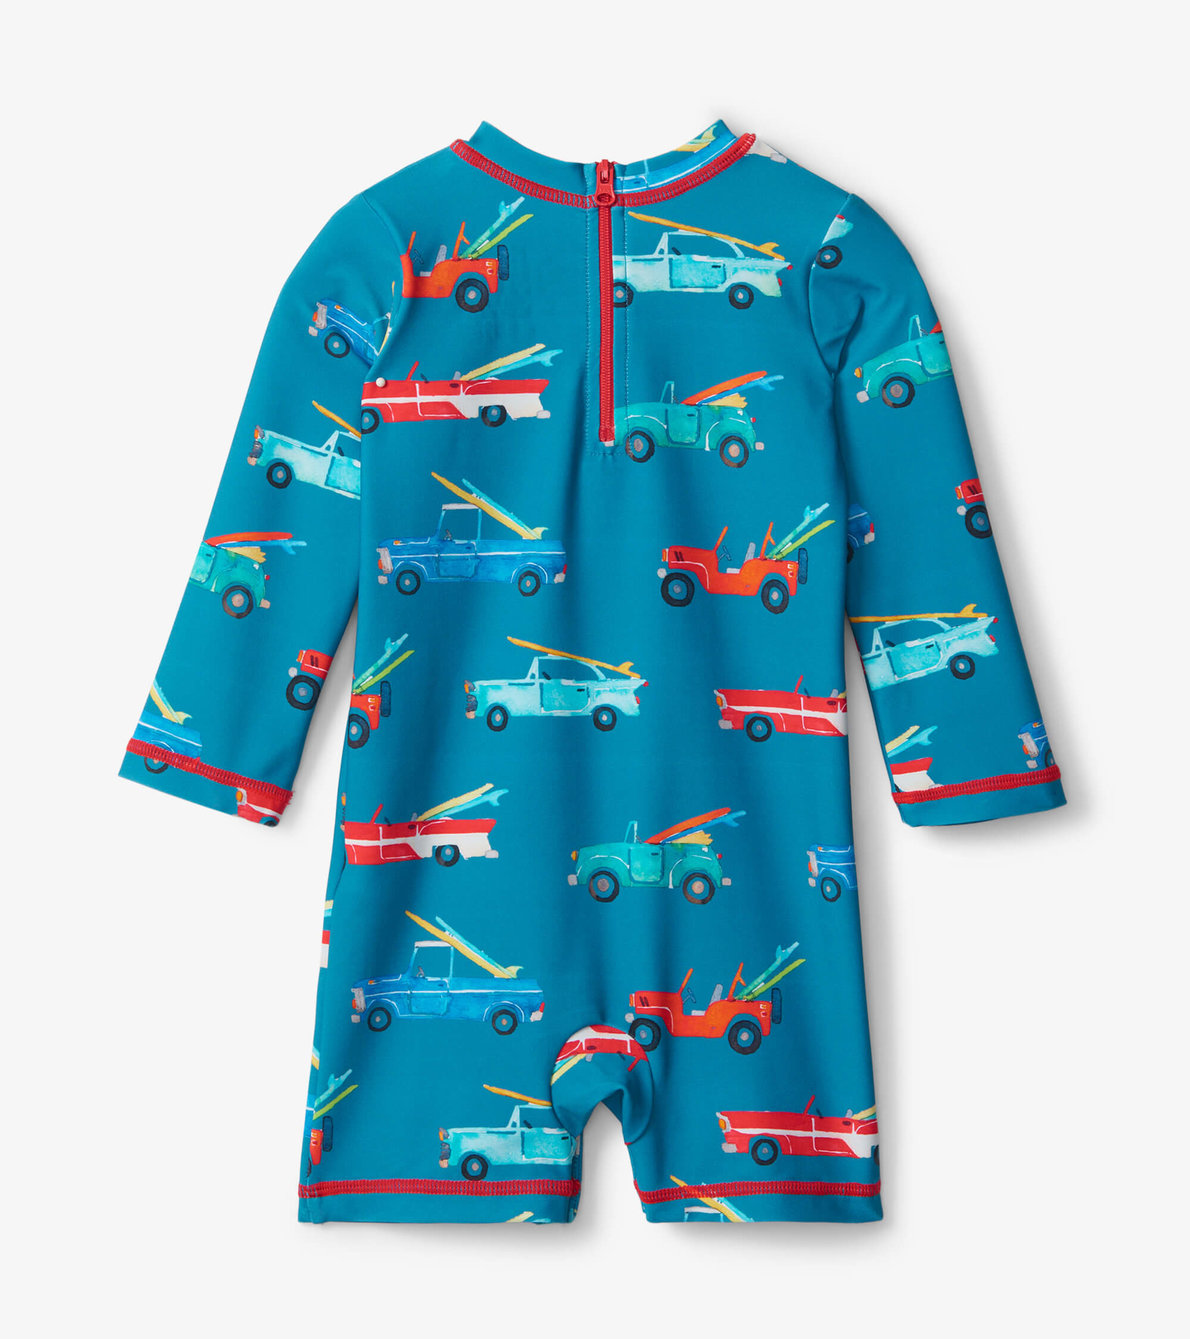 View larger image of Surf Cars Baby One-Piece Rashguard